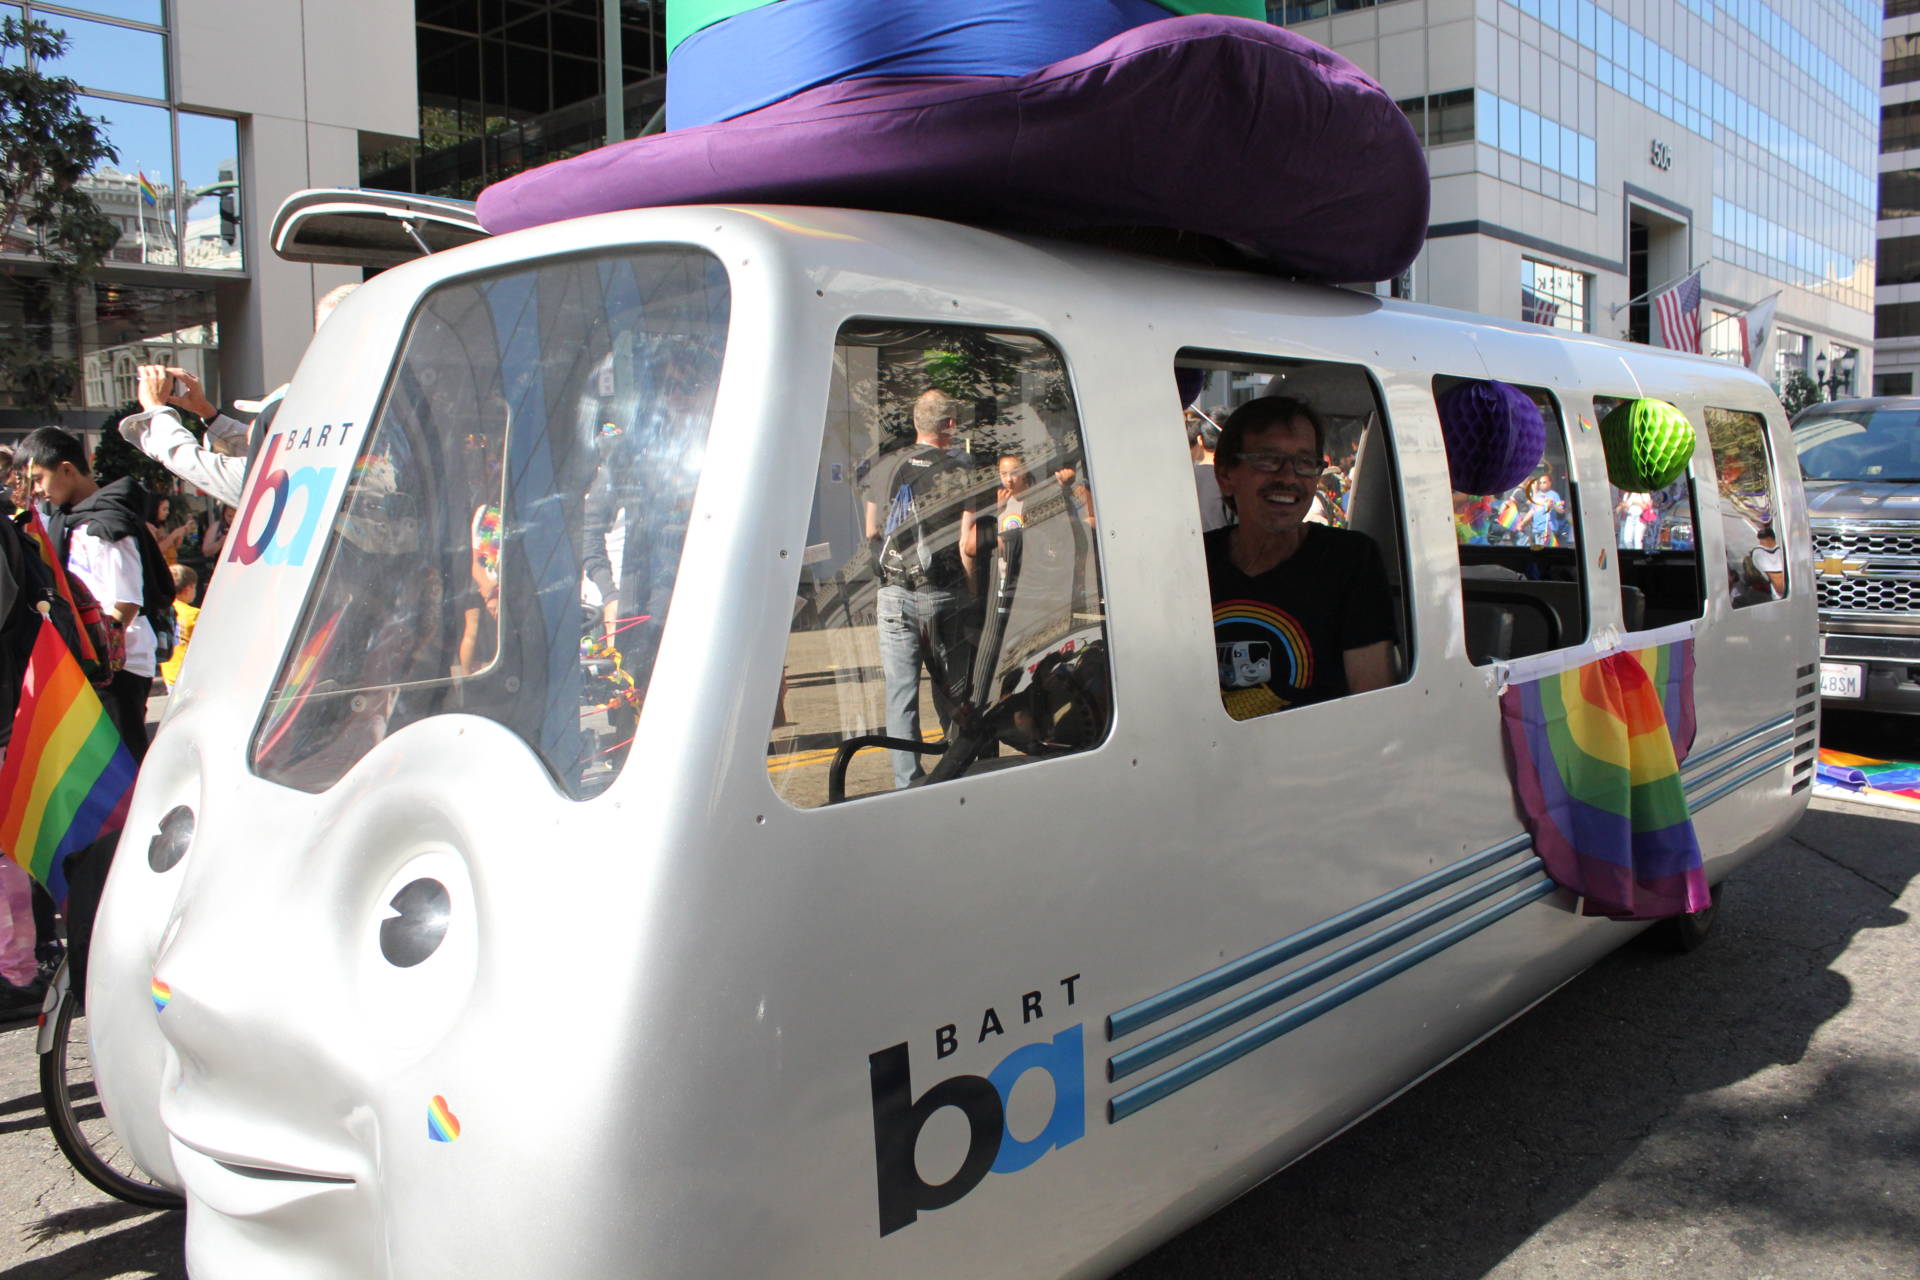 BART Board President Robert Raburn says it's going to be a tough budget year for BART, but he "twisted arms" to make sure the BARTmobile could take part in Oakland Pride on Sunday.